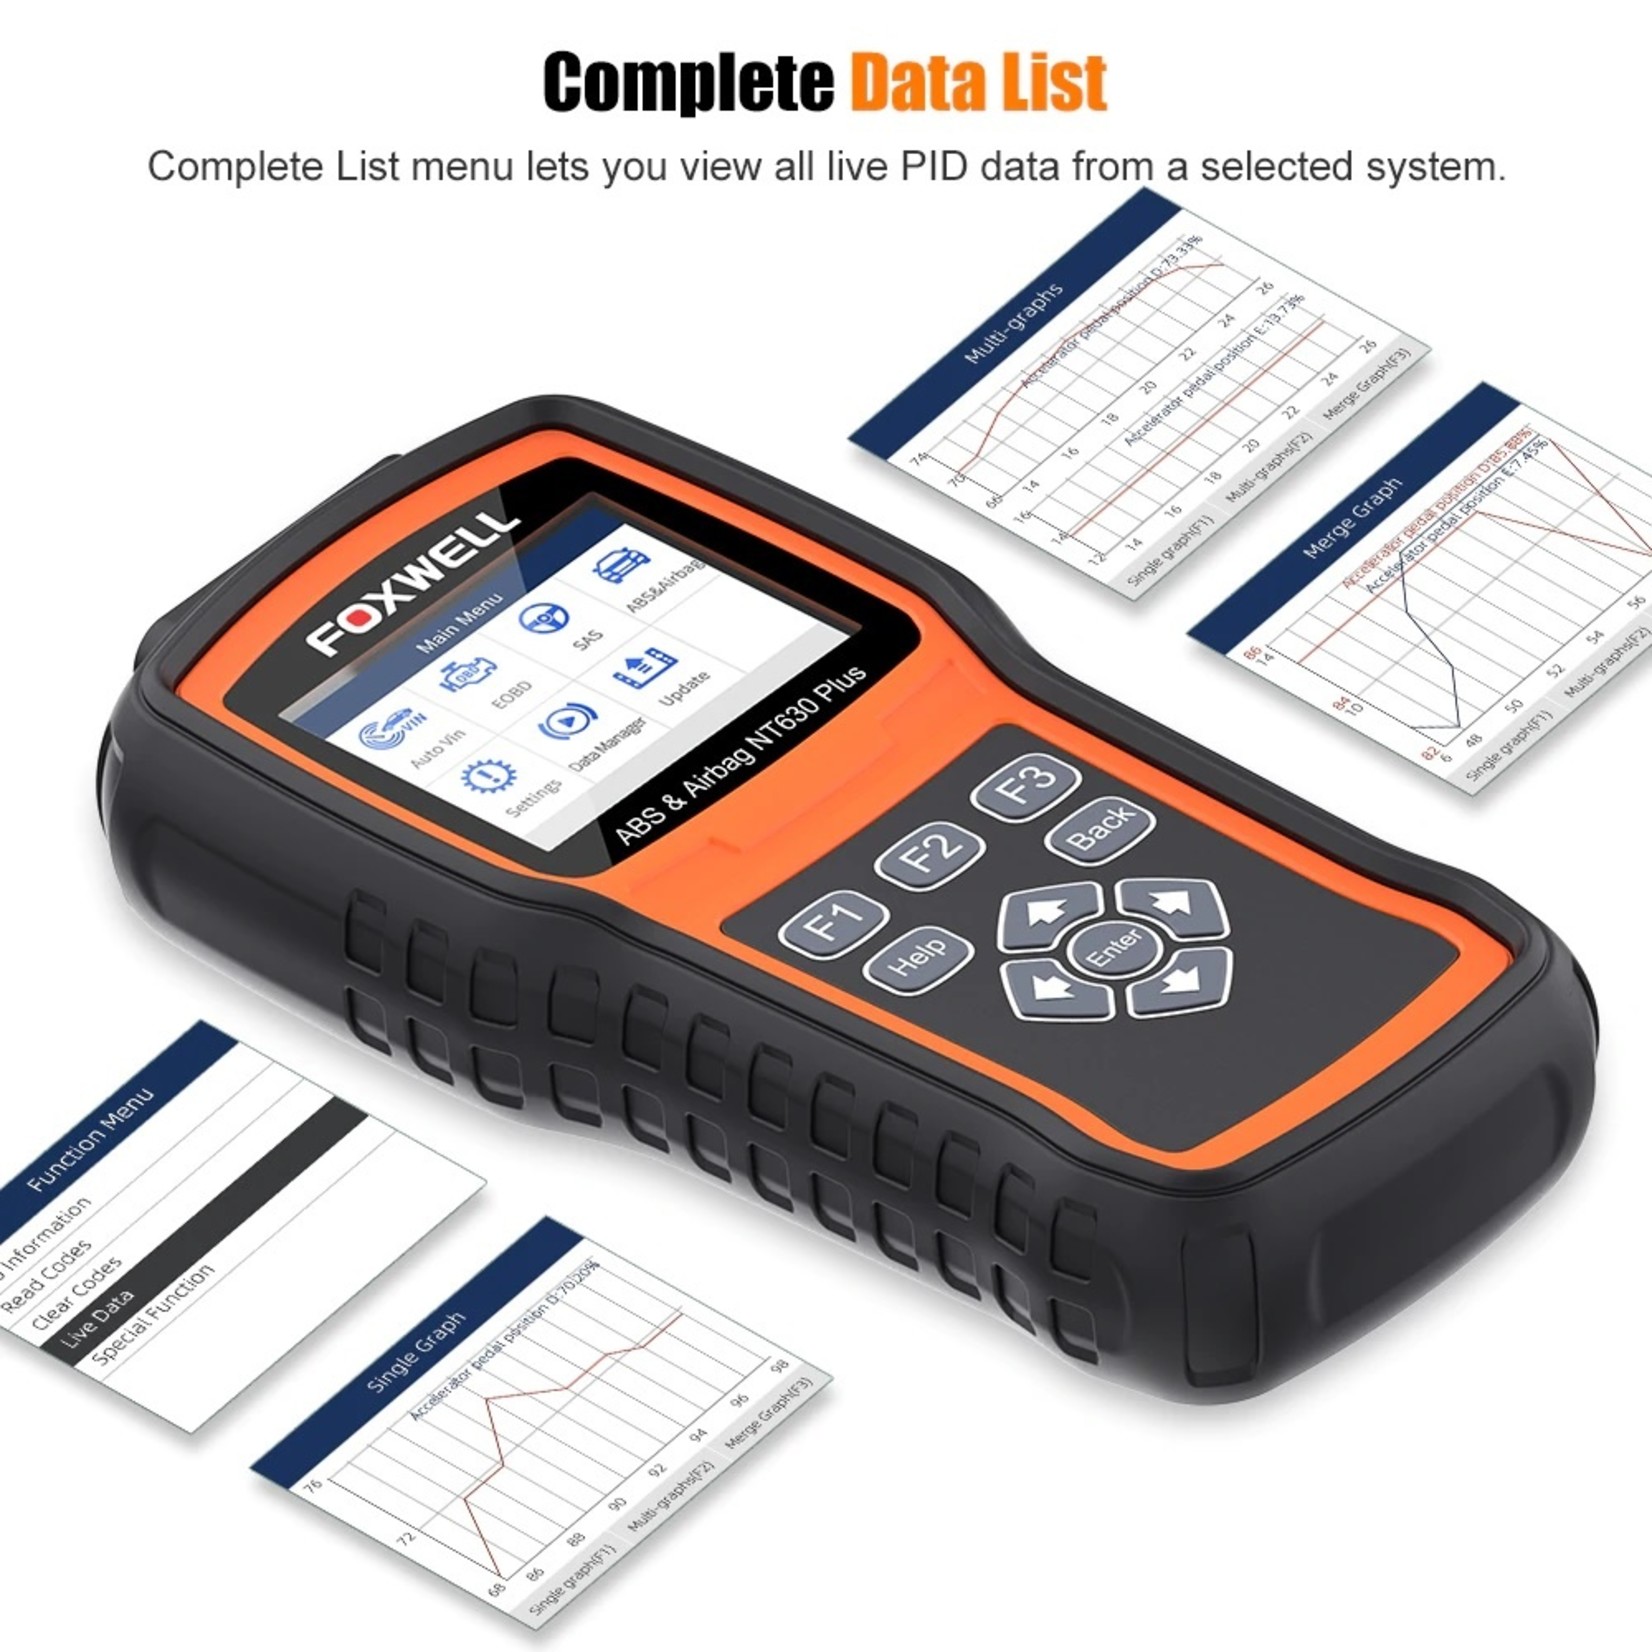 Foxwell Foxwell NT630 Plus Universele OBD2, ABS en Airbag Tool – Bluetooth scanner - OBD2 scanner - diagnose gereedschap - tool